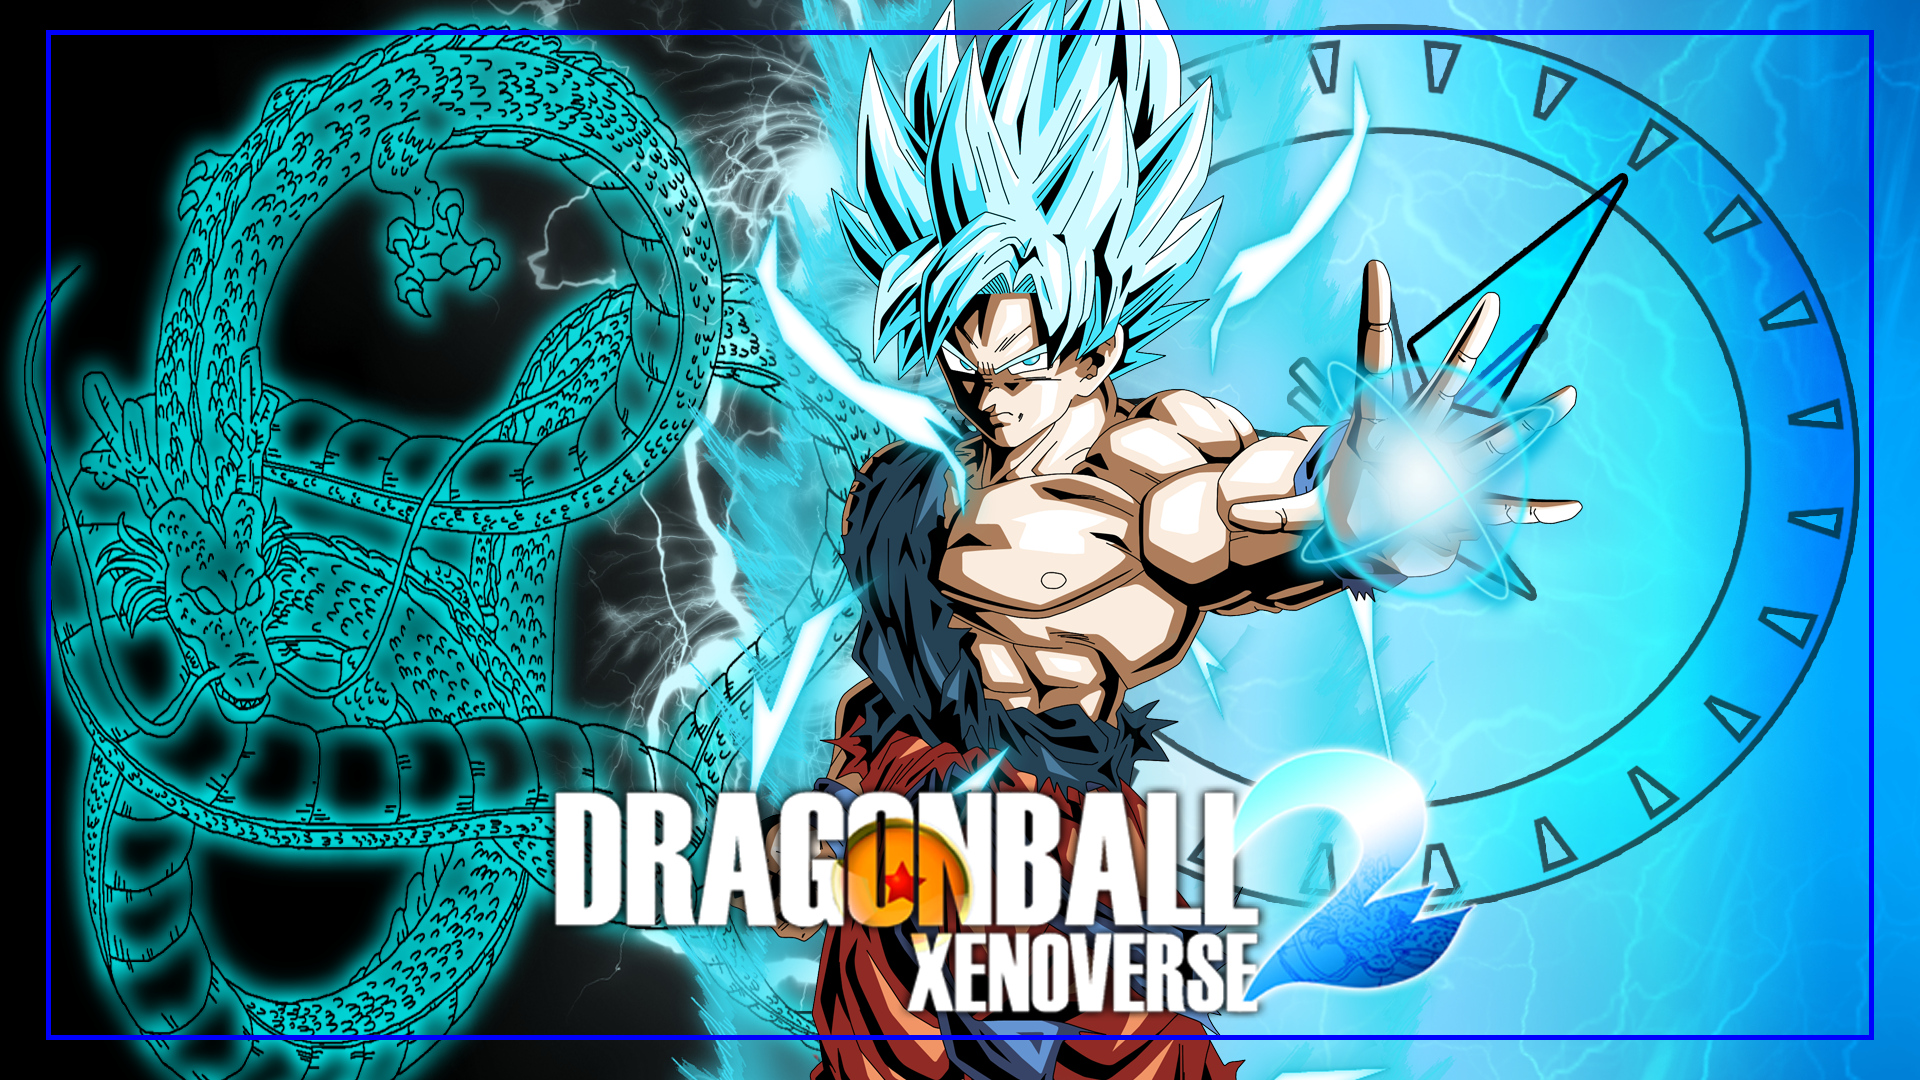 Amazing Dragon Ball Xenoverse 2 Pictures & Backgrounds